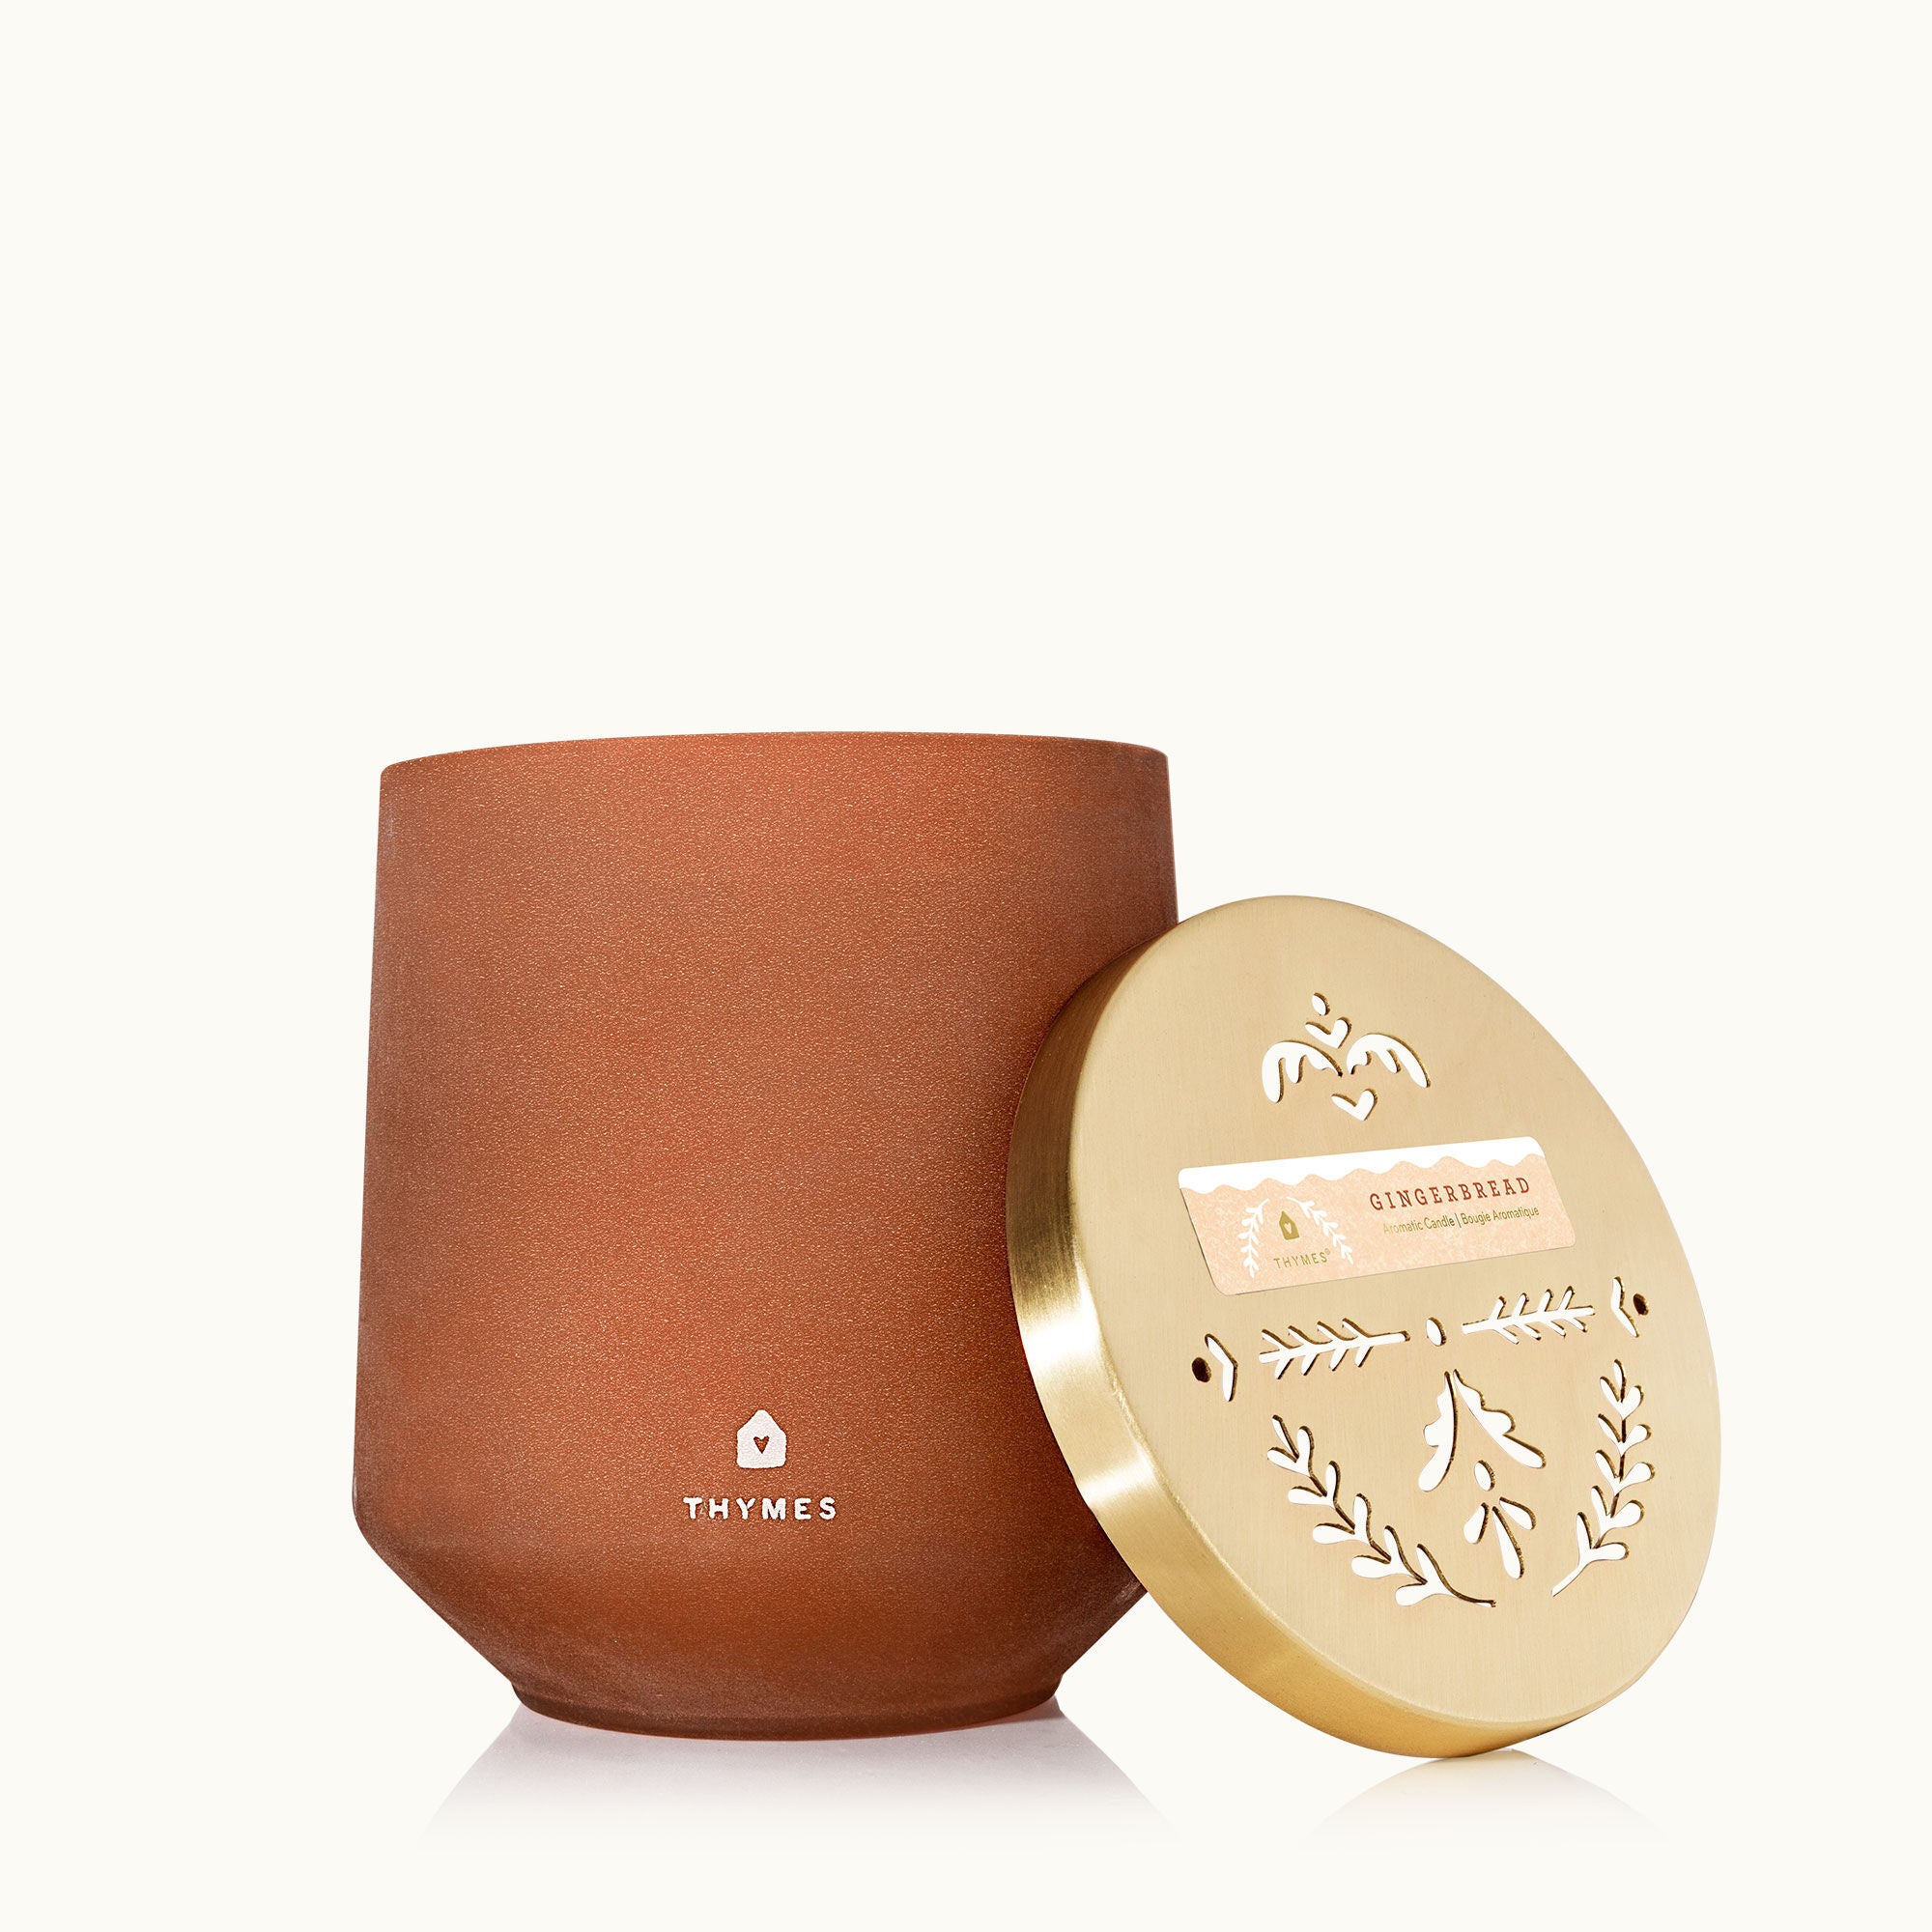 Thymes - Gingerbread Large Poured Candle